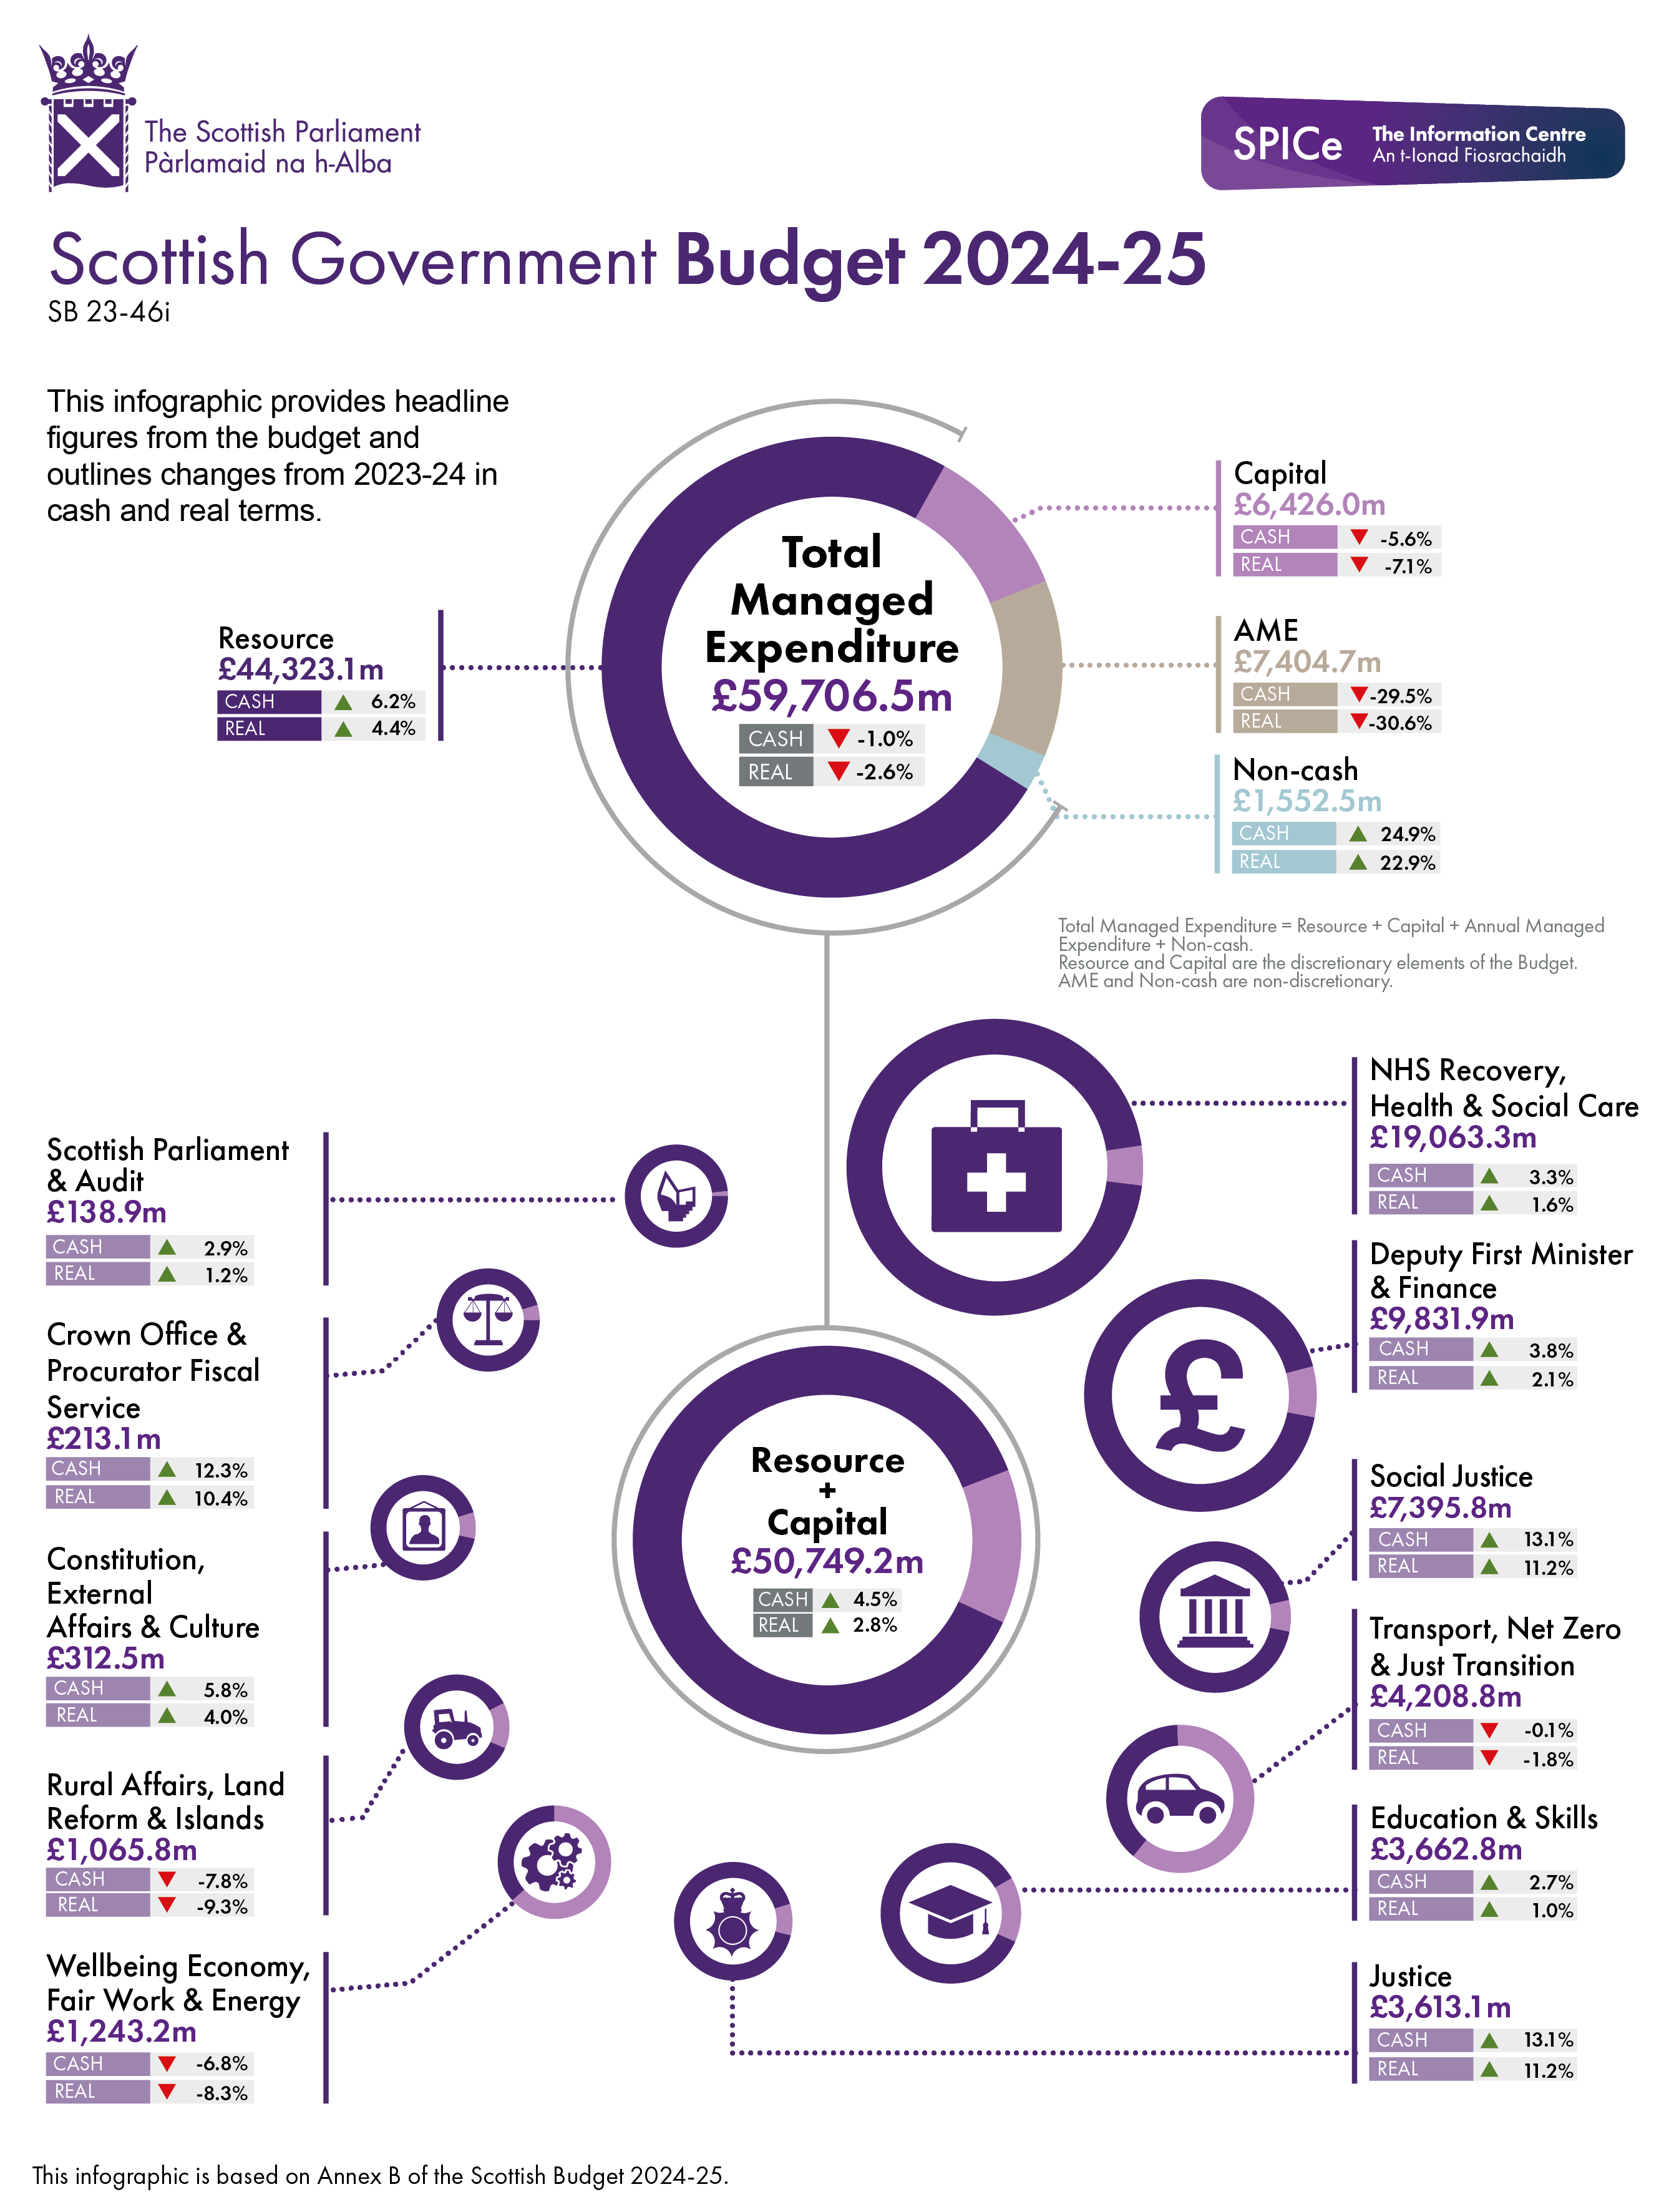 Image presenting headline figures from the Scottish Government Budget and outlines changes from 2023-24 in cash and real terms. The data can be found in the data tables of this briefing.